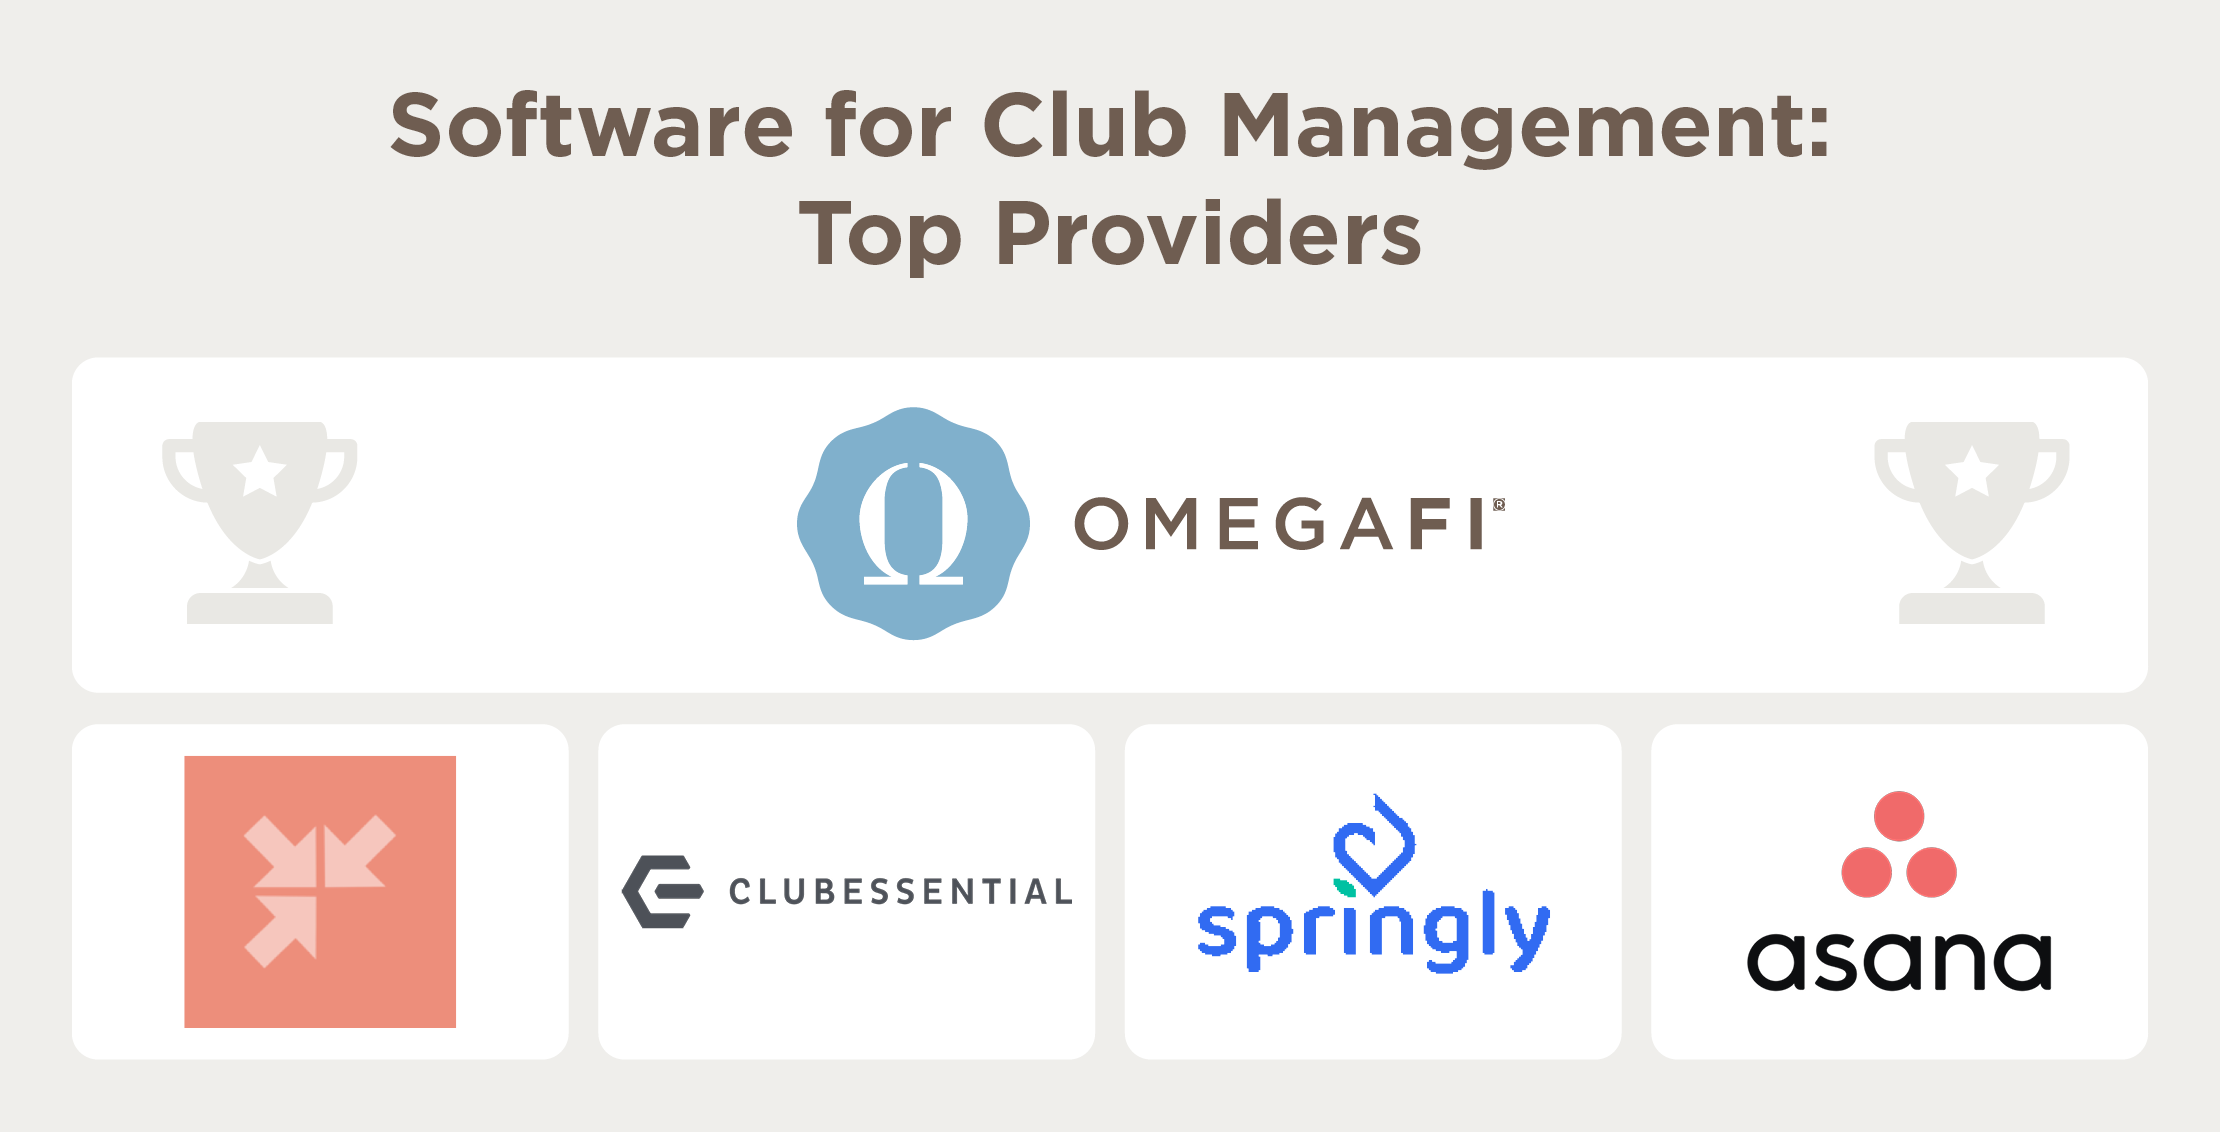 The top providers of software for club management: OmegaFi, Join It, Clubessential, Springly and Asana. 